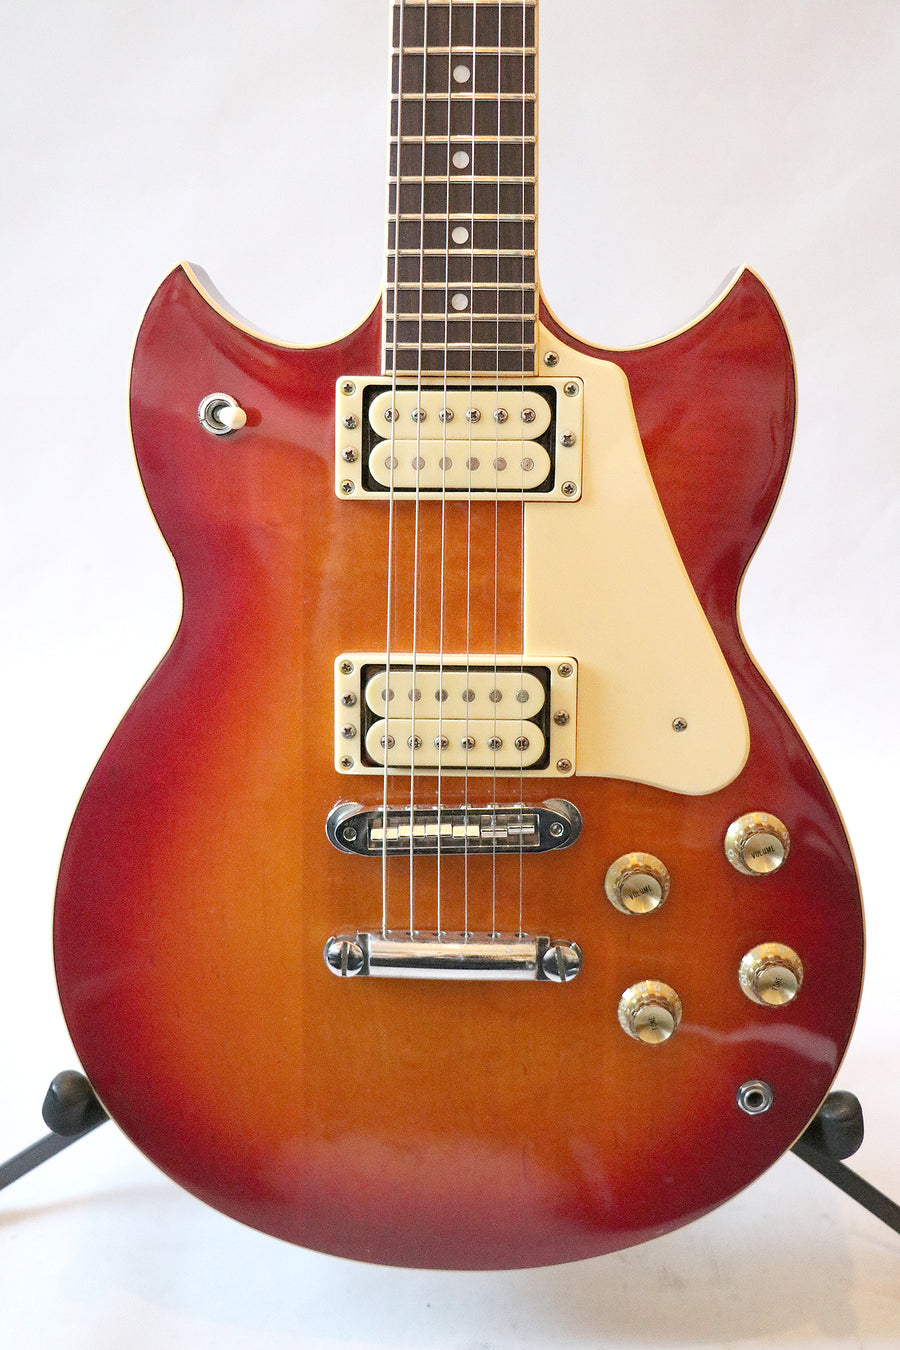 Yamaha SG-800S 1982 – The Guitar Colonel